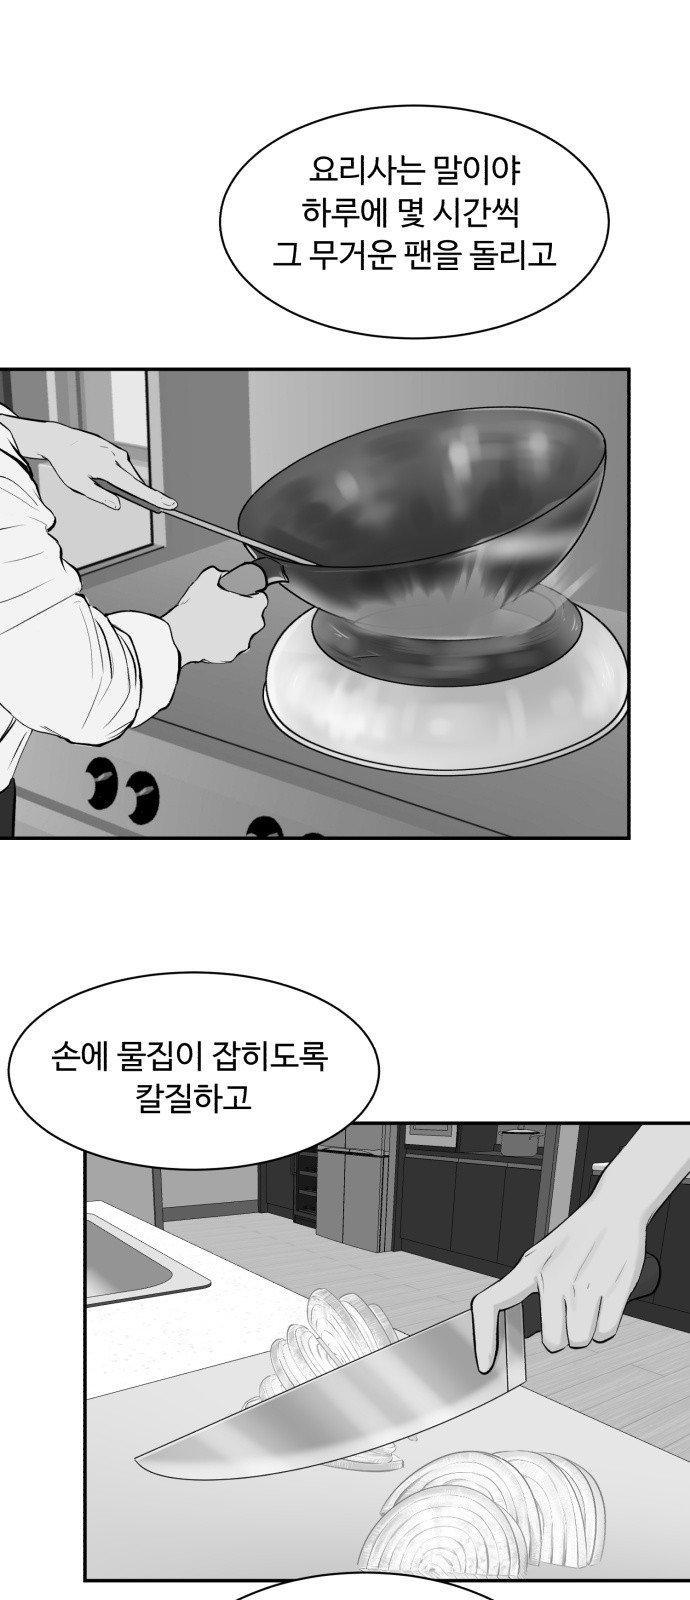 Cooking GO! - Chapter 141 - Page 1